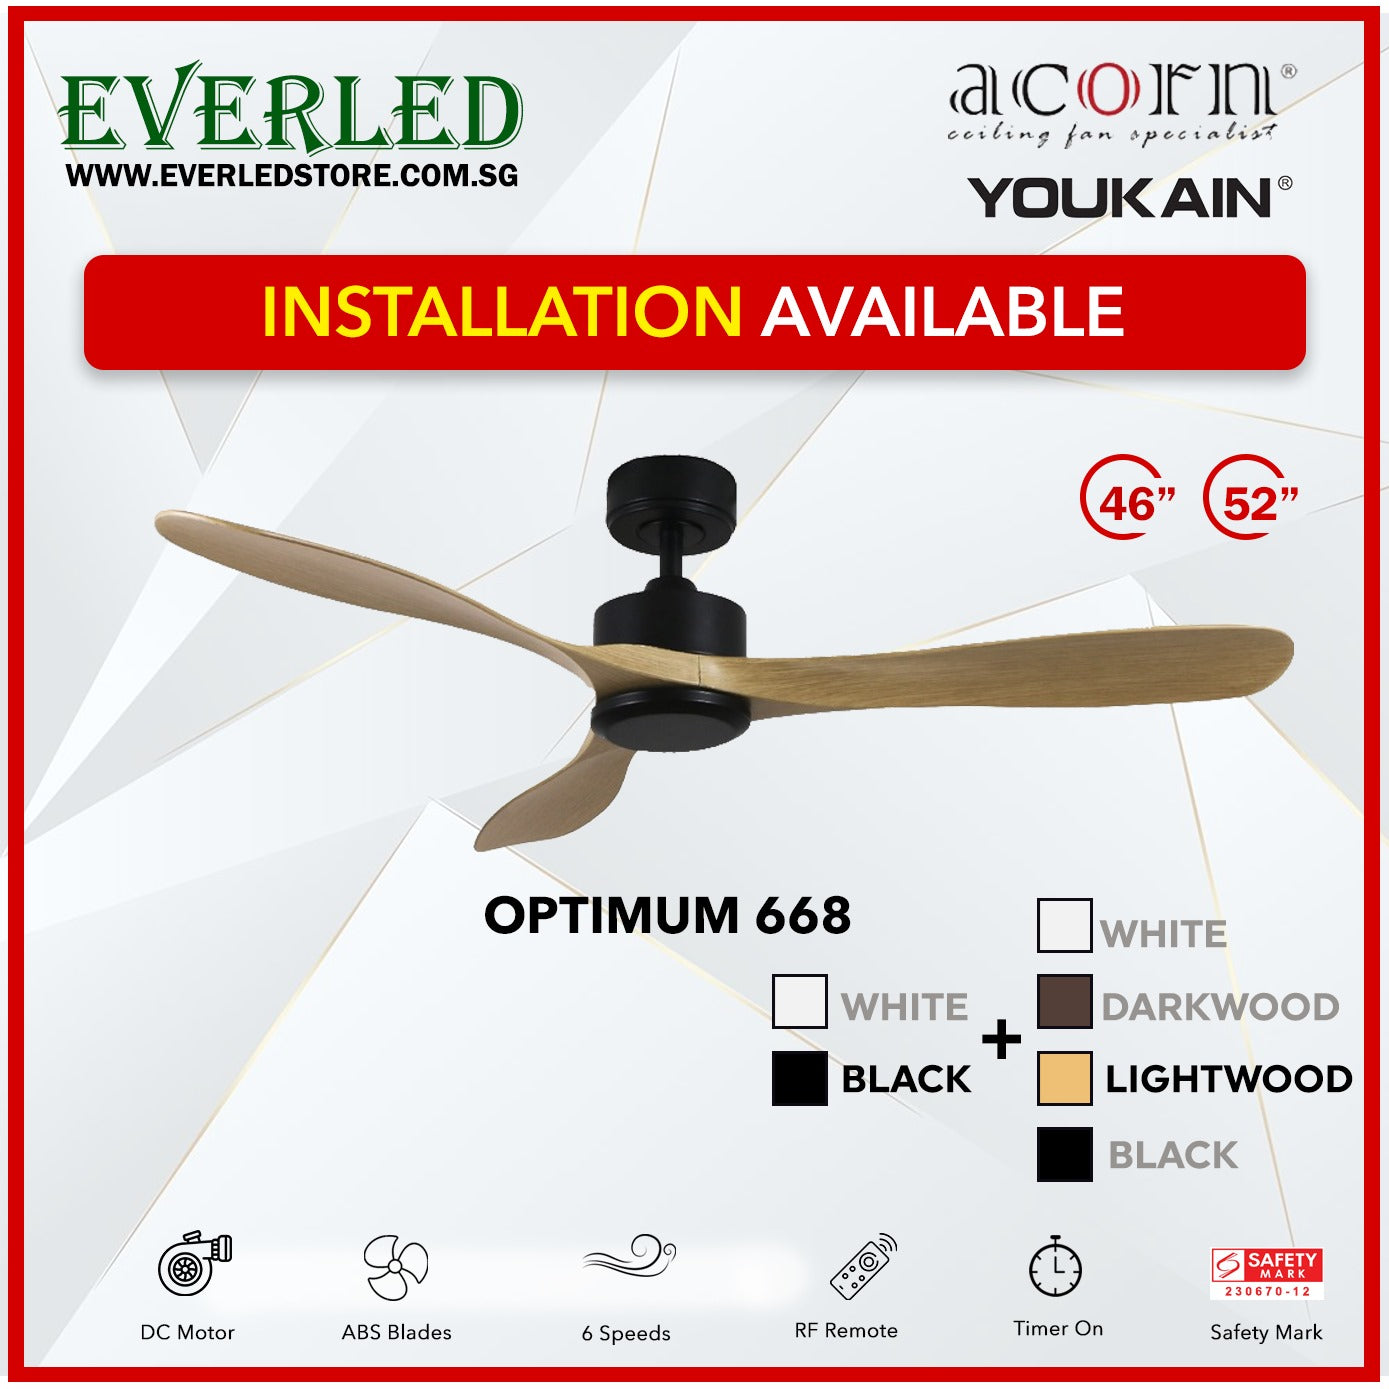 *INSTALLATION AVAILABLE* Acorn (Youkain) *SMART DC INVERTER* Optimum 668 46"/52"  with Tri-color LED